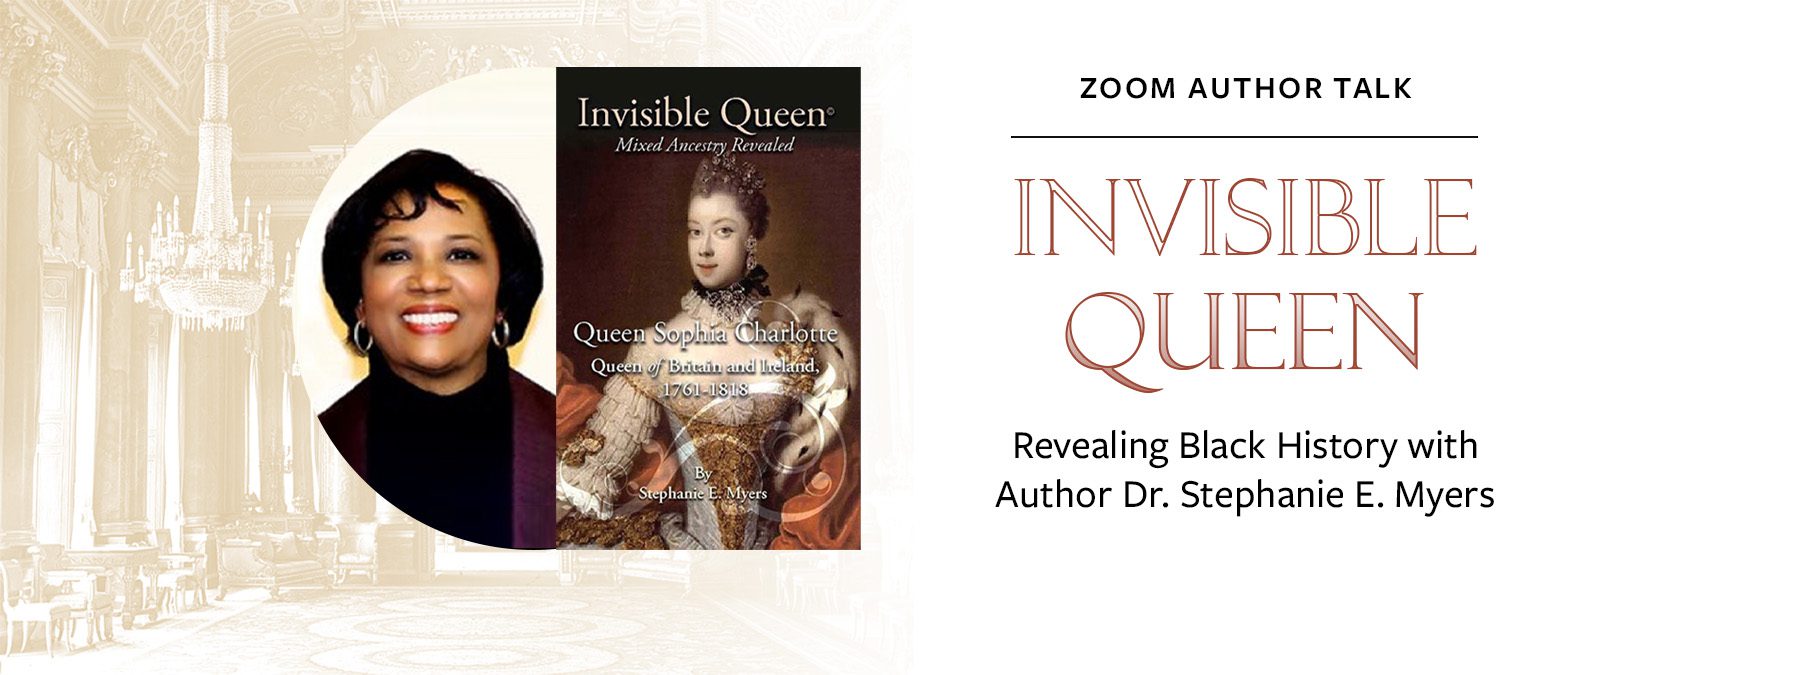 Zoom Author Talk: Invisible Queen, Revealing Black History with Author Dr. Stephanie E. Myers